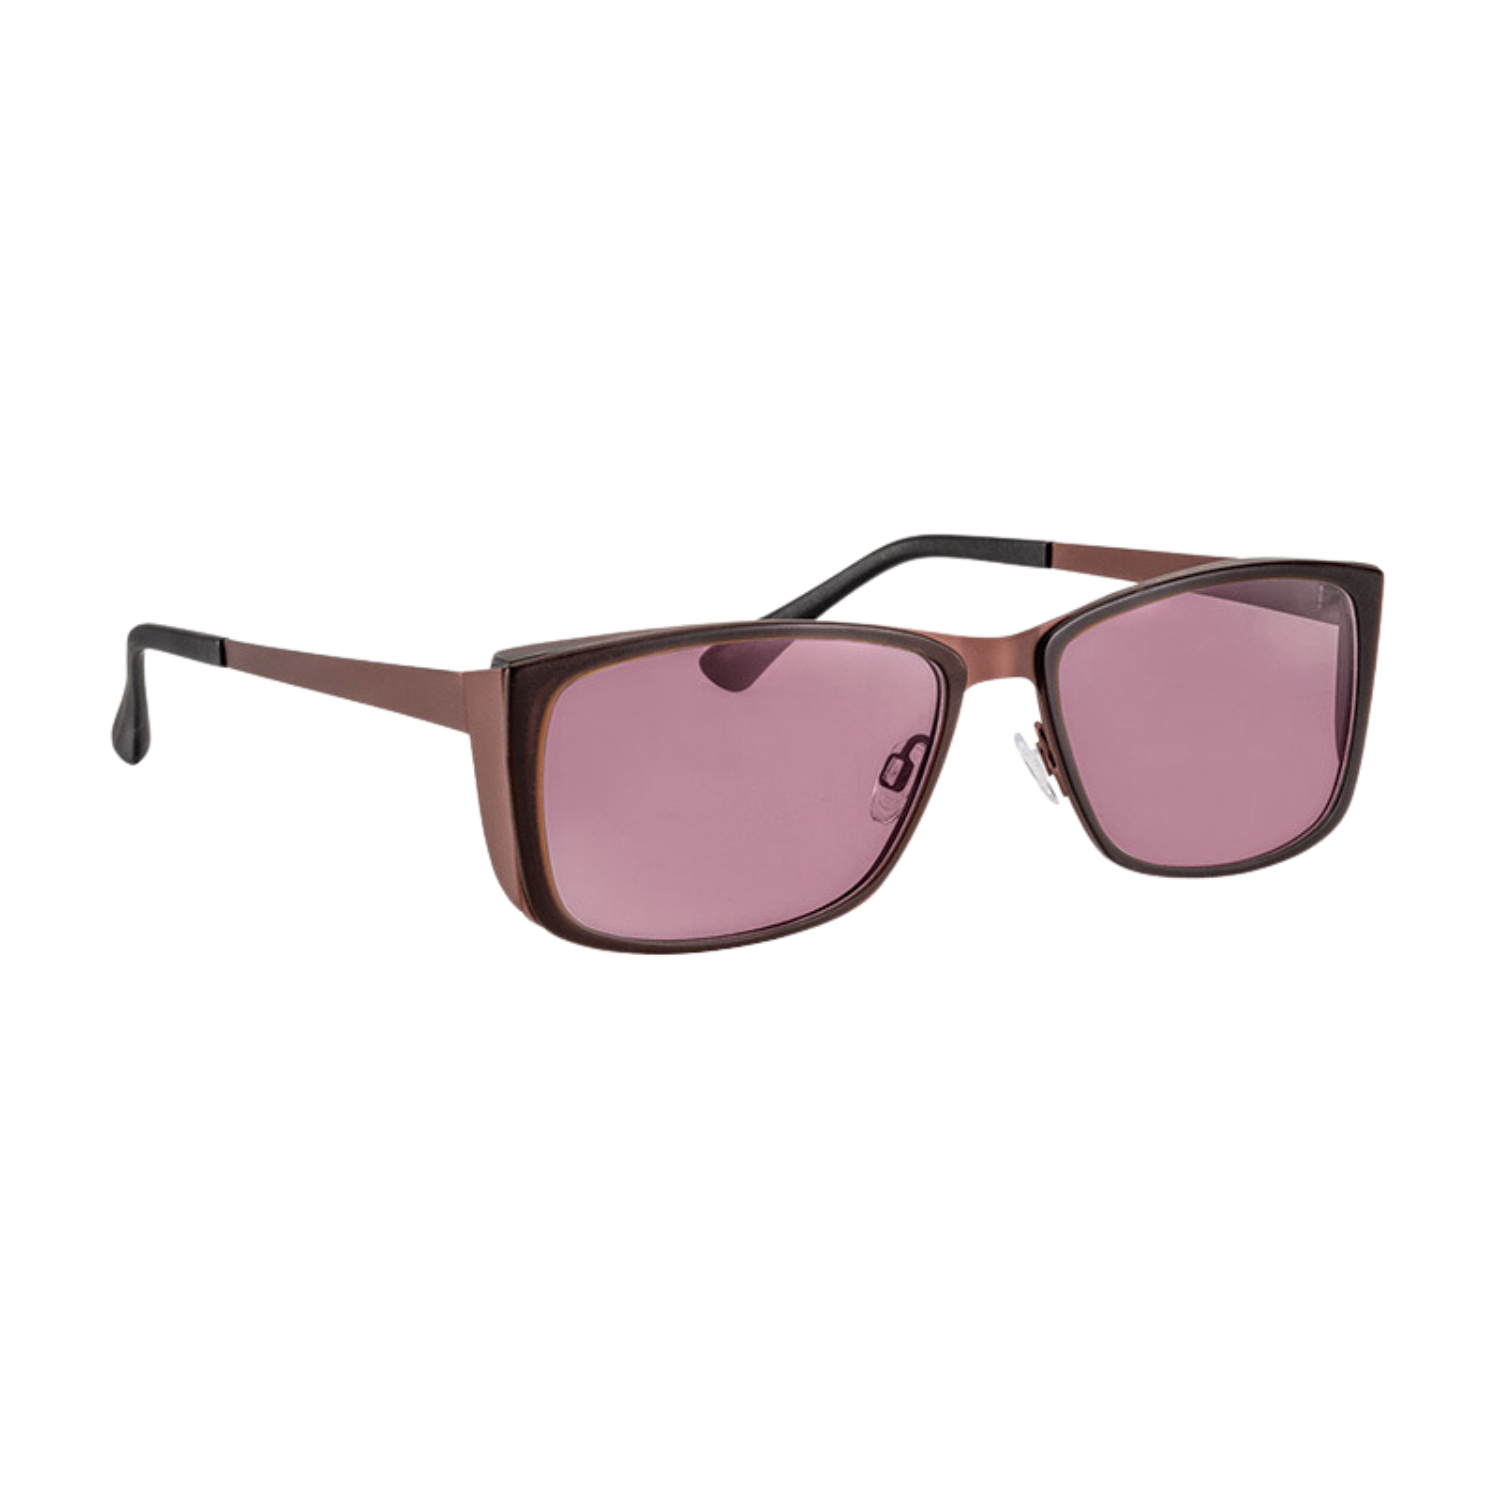 Image of the brown stainless steel Acunis FL-41 Light Sensitivity Glasses with 50% light absorption.